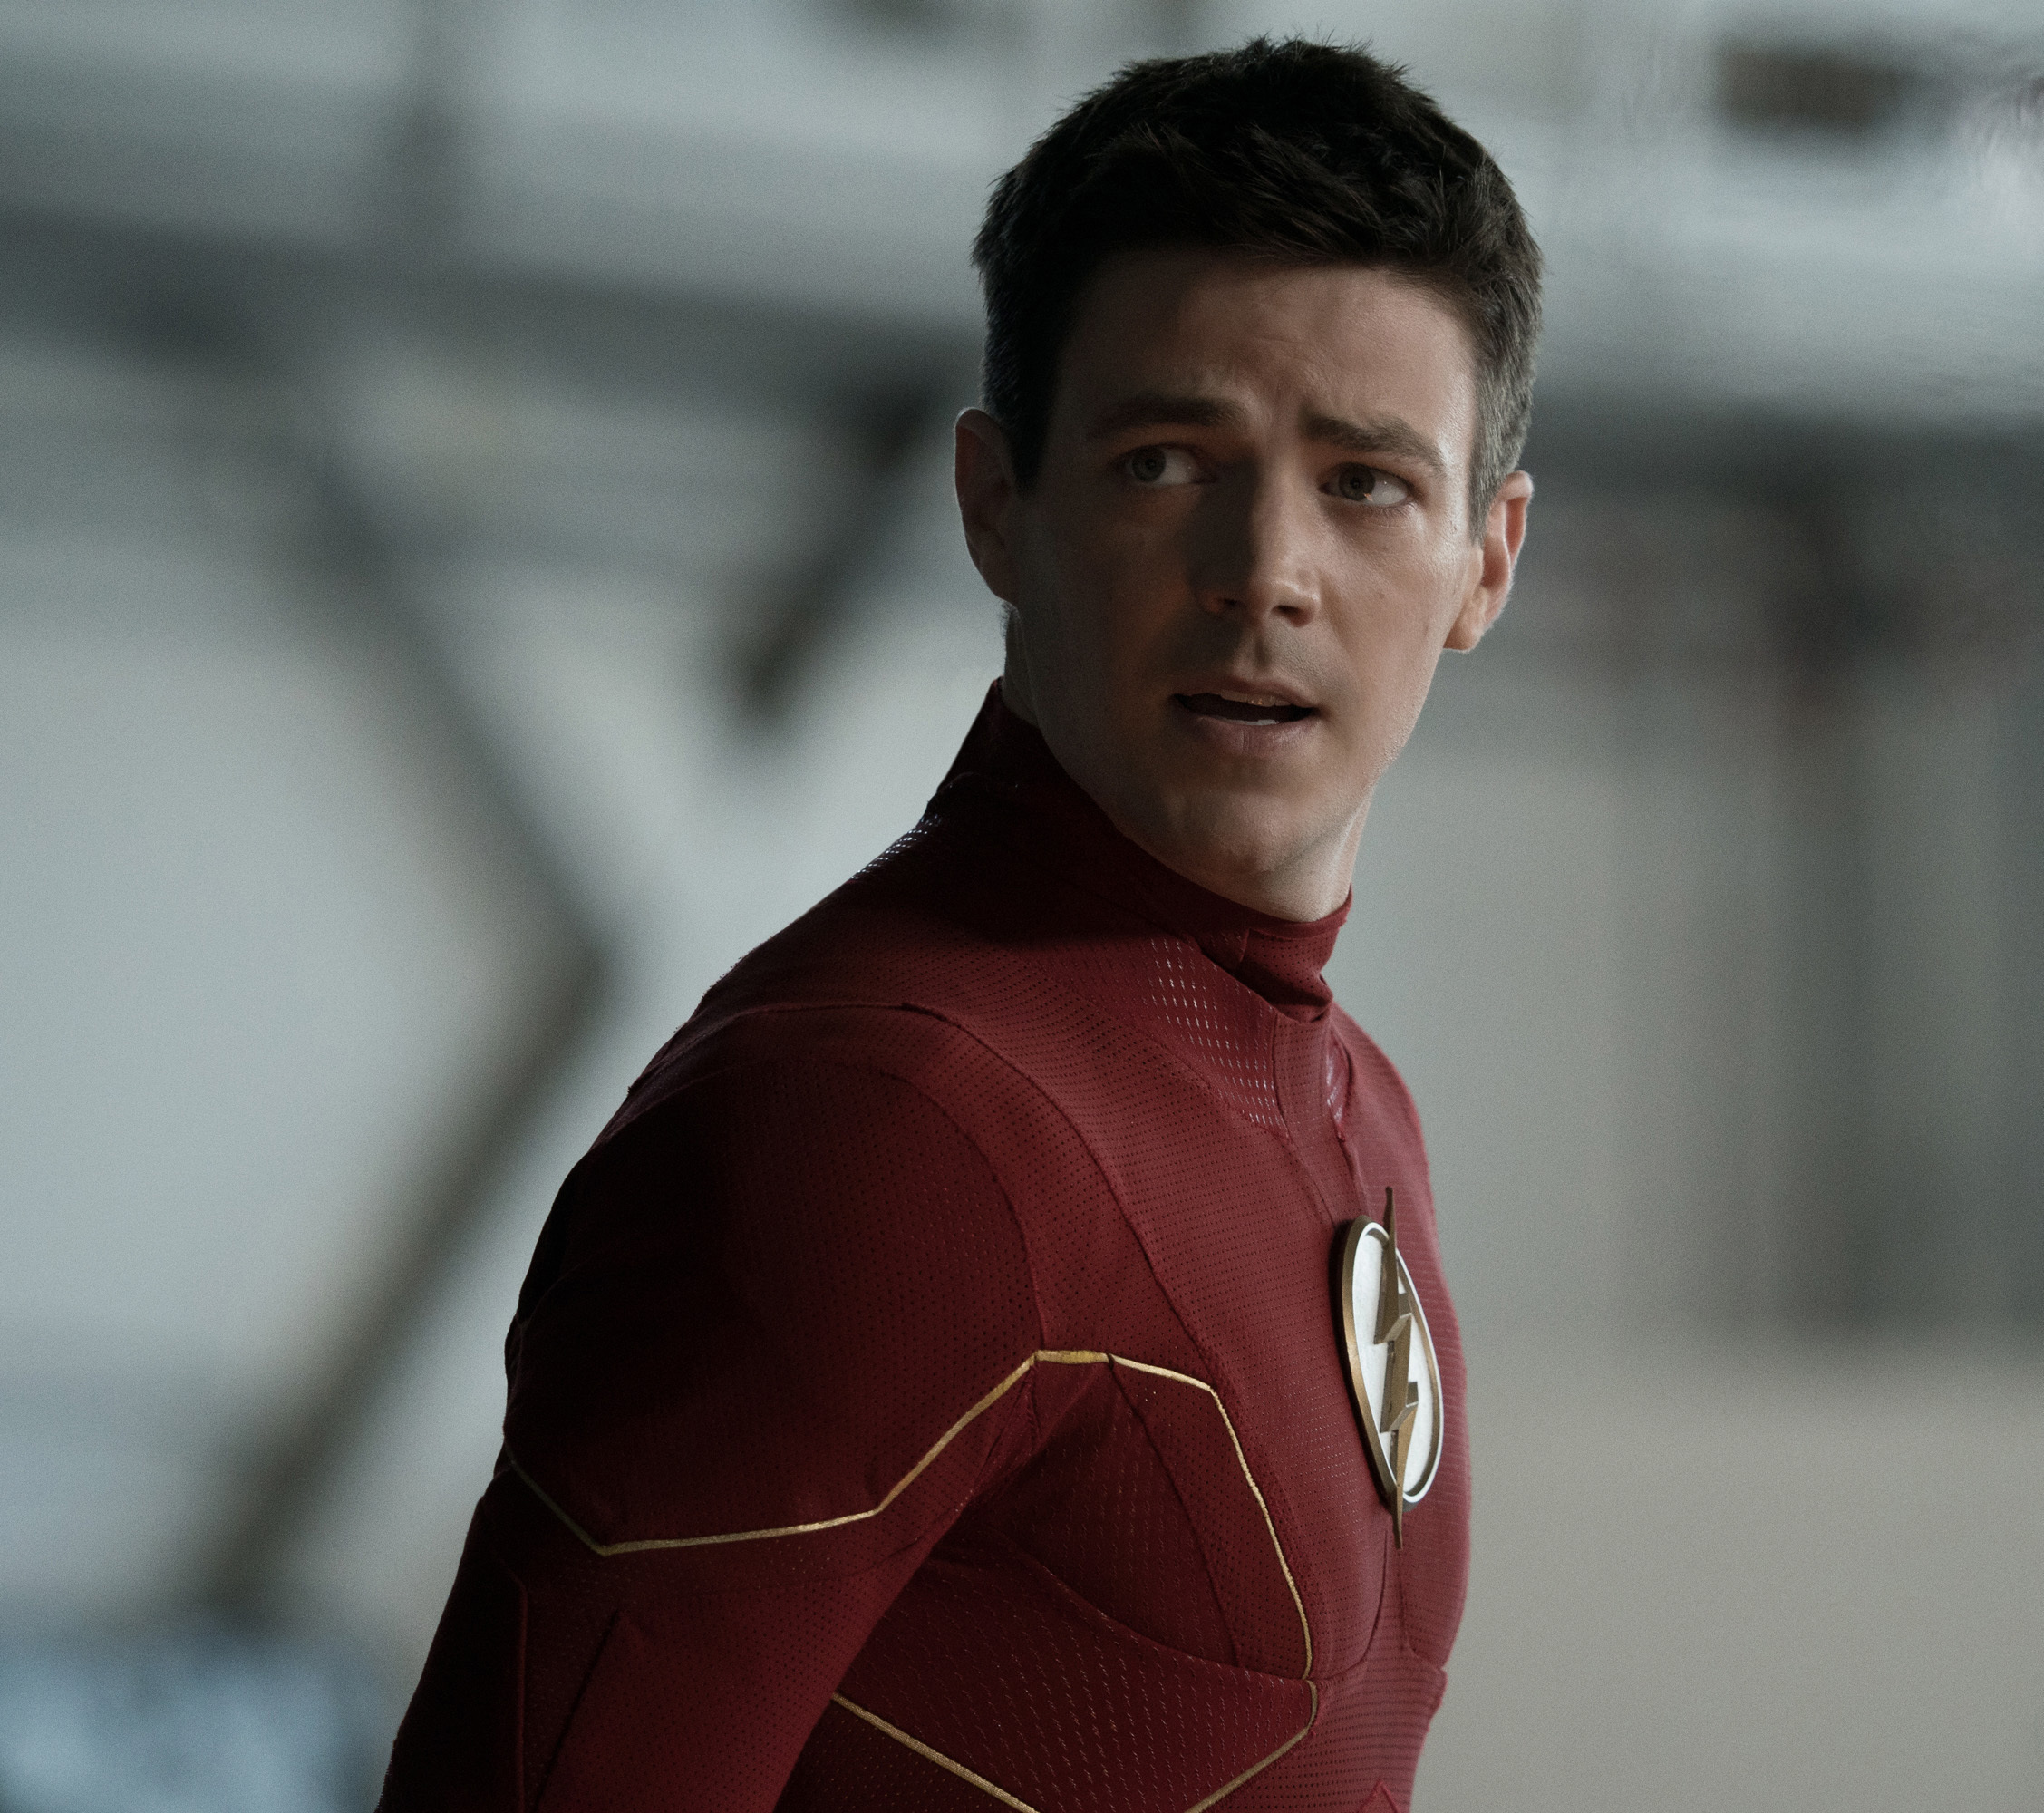 TV Show The Flash 2014 2255x2000